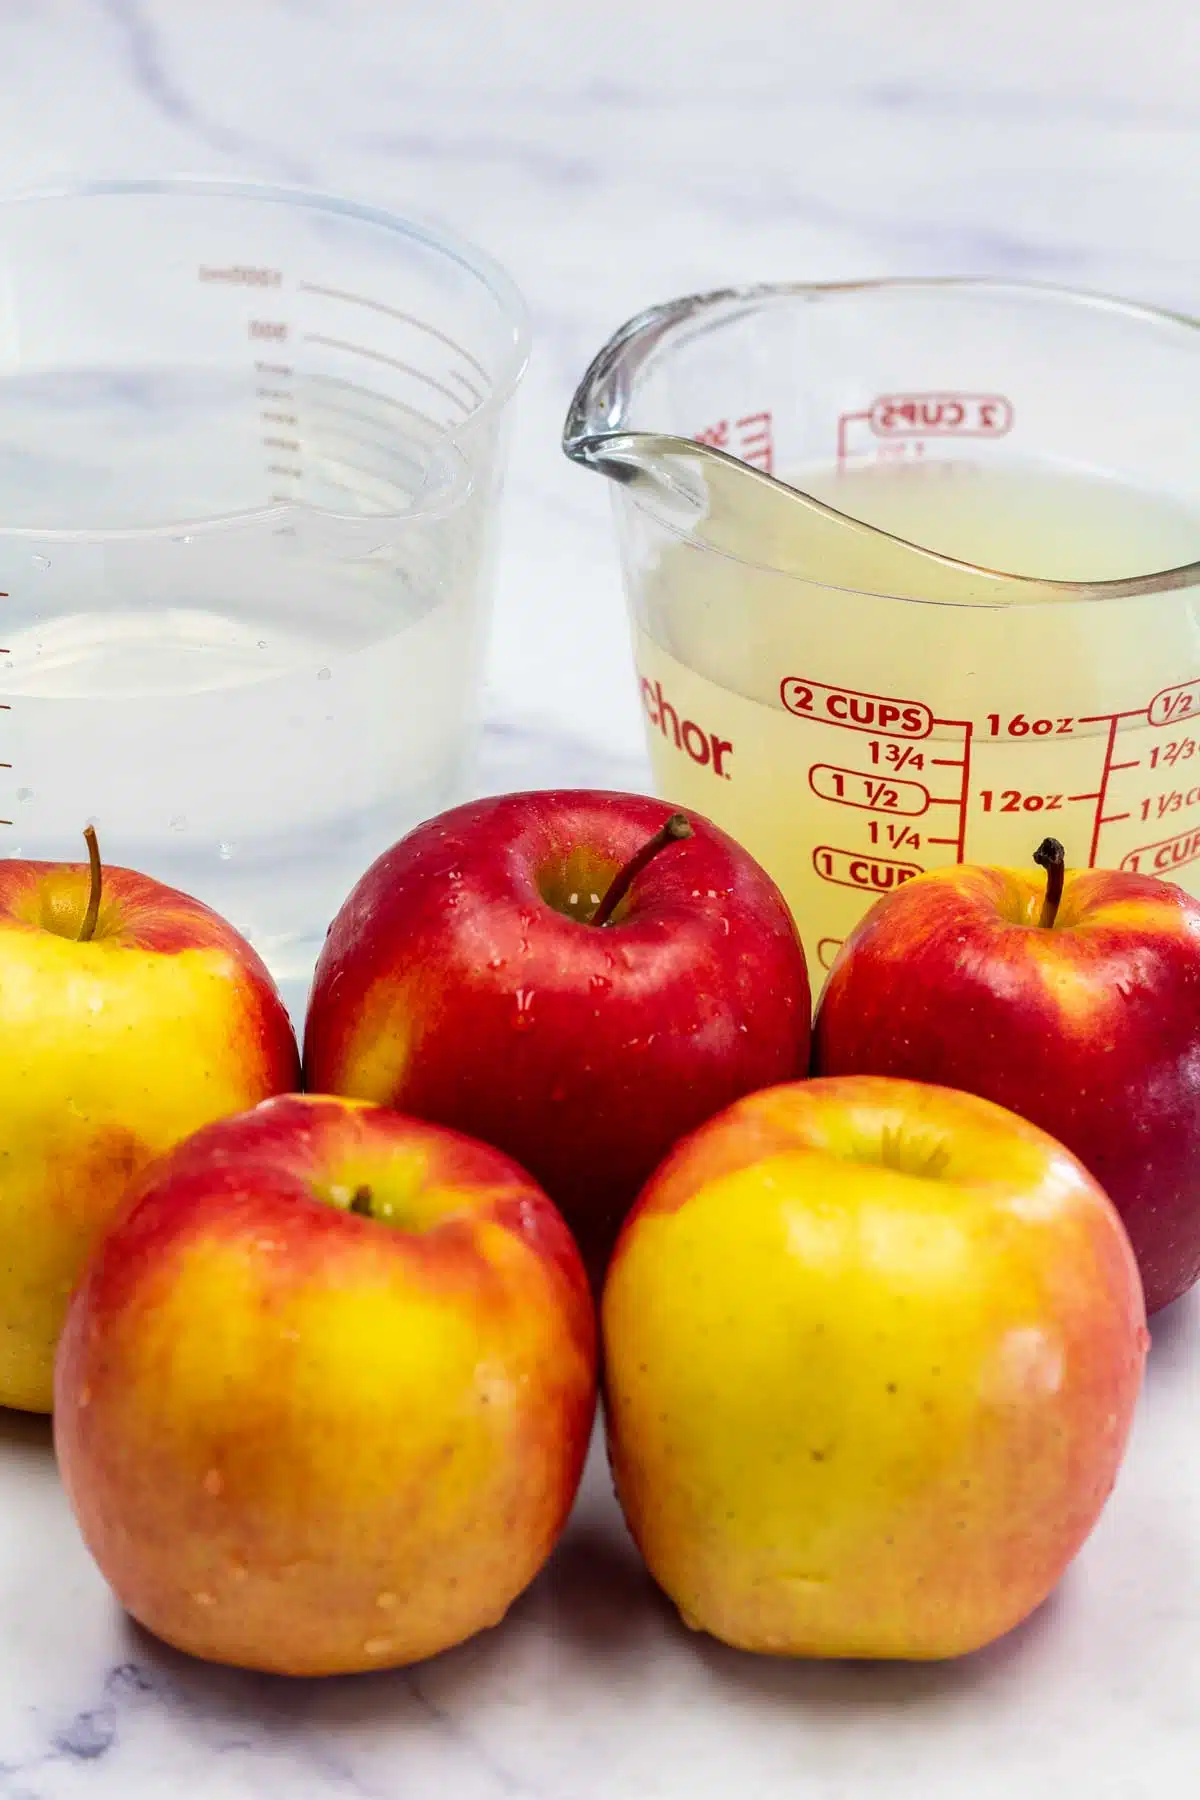 Tall image showing ingredients needed for dehydrated apples.